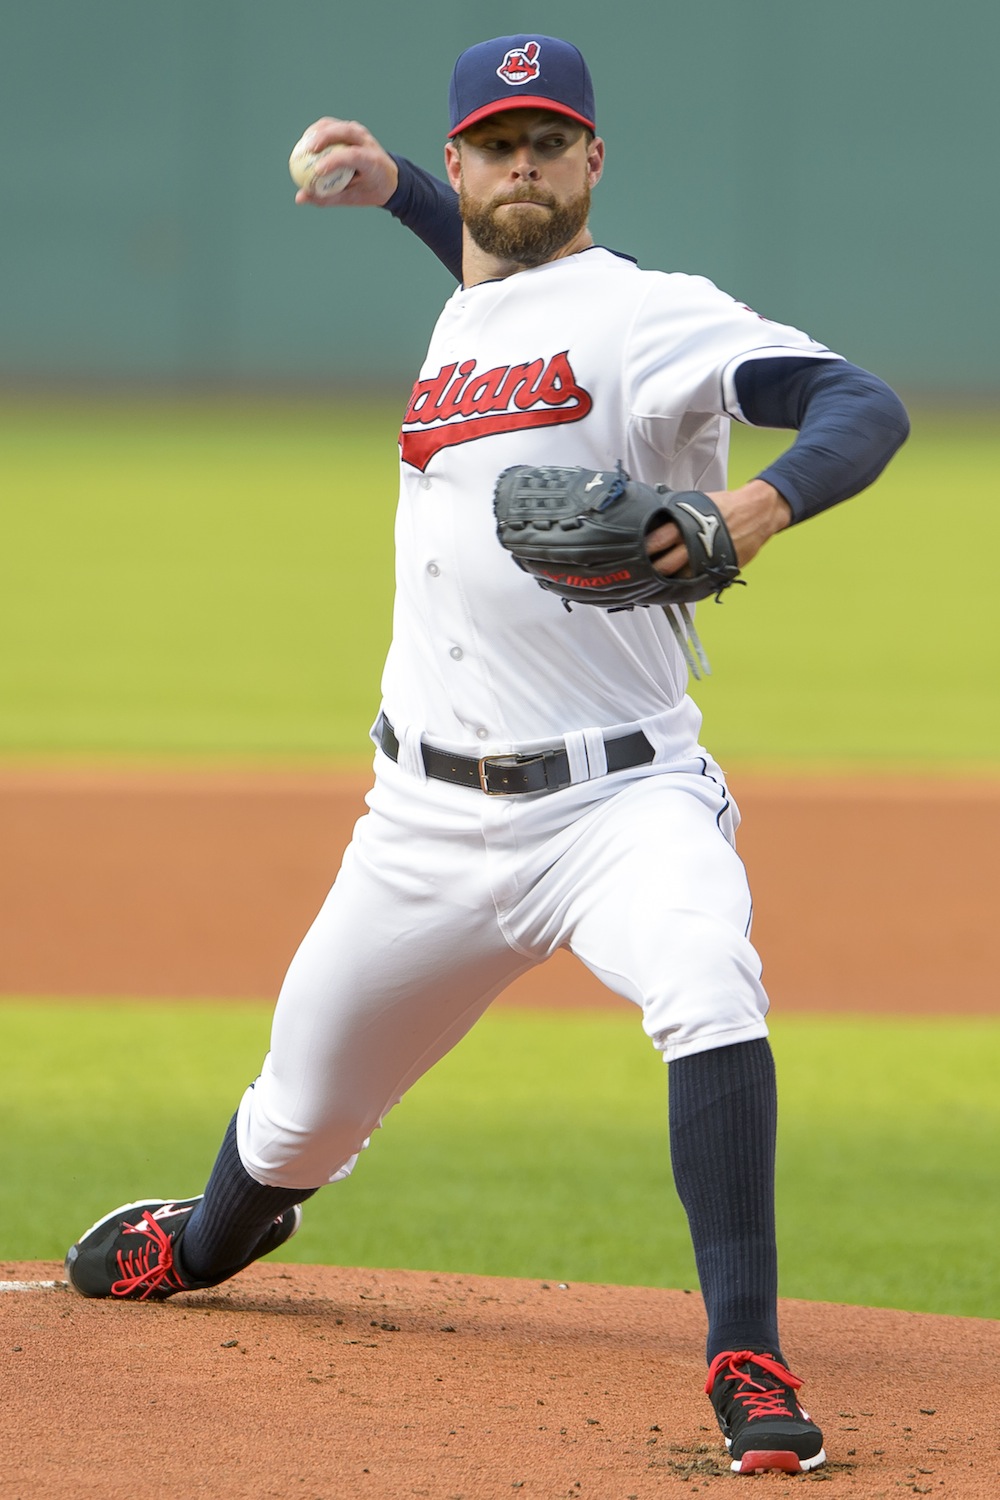 Cleveland Indian's pitchers Corey Kluber shown here.(Photo by Jason Miller/Getty Images)